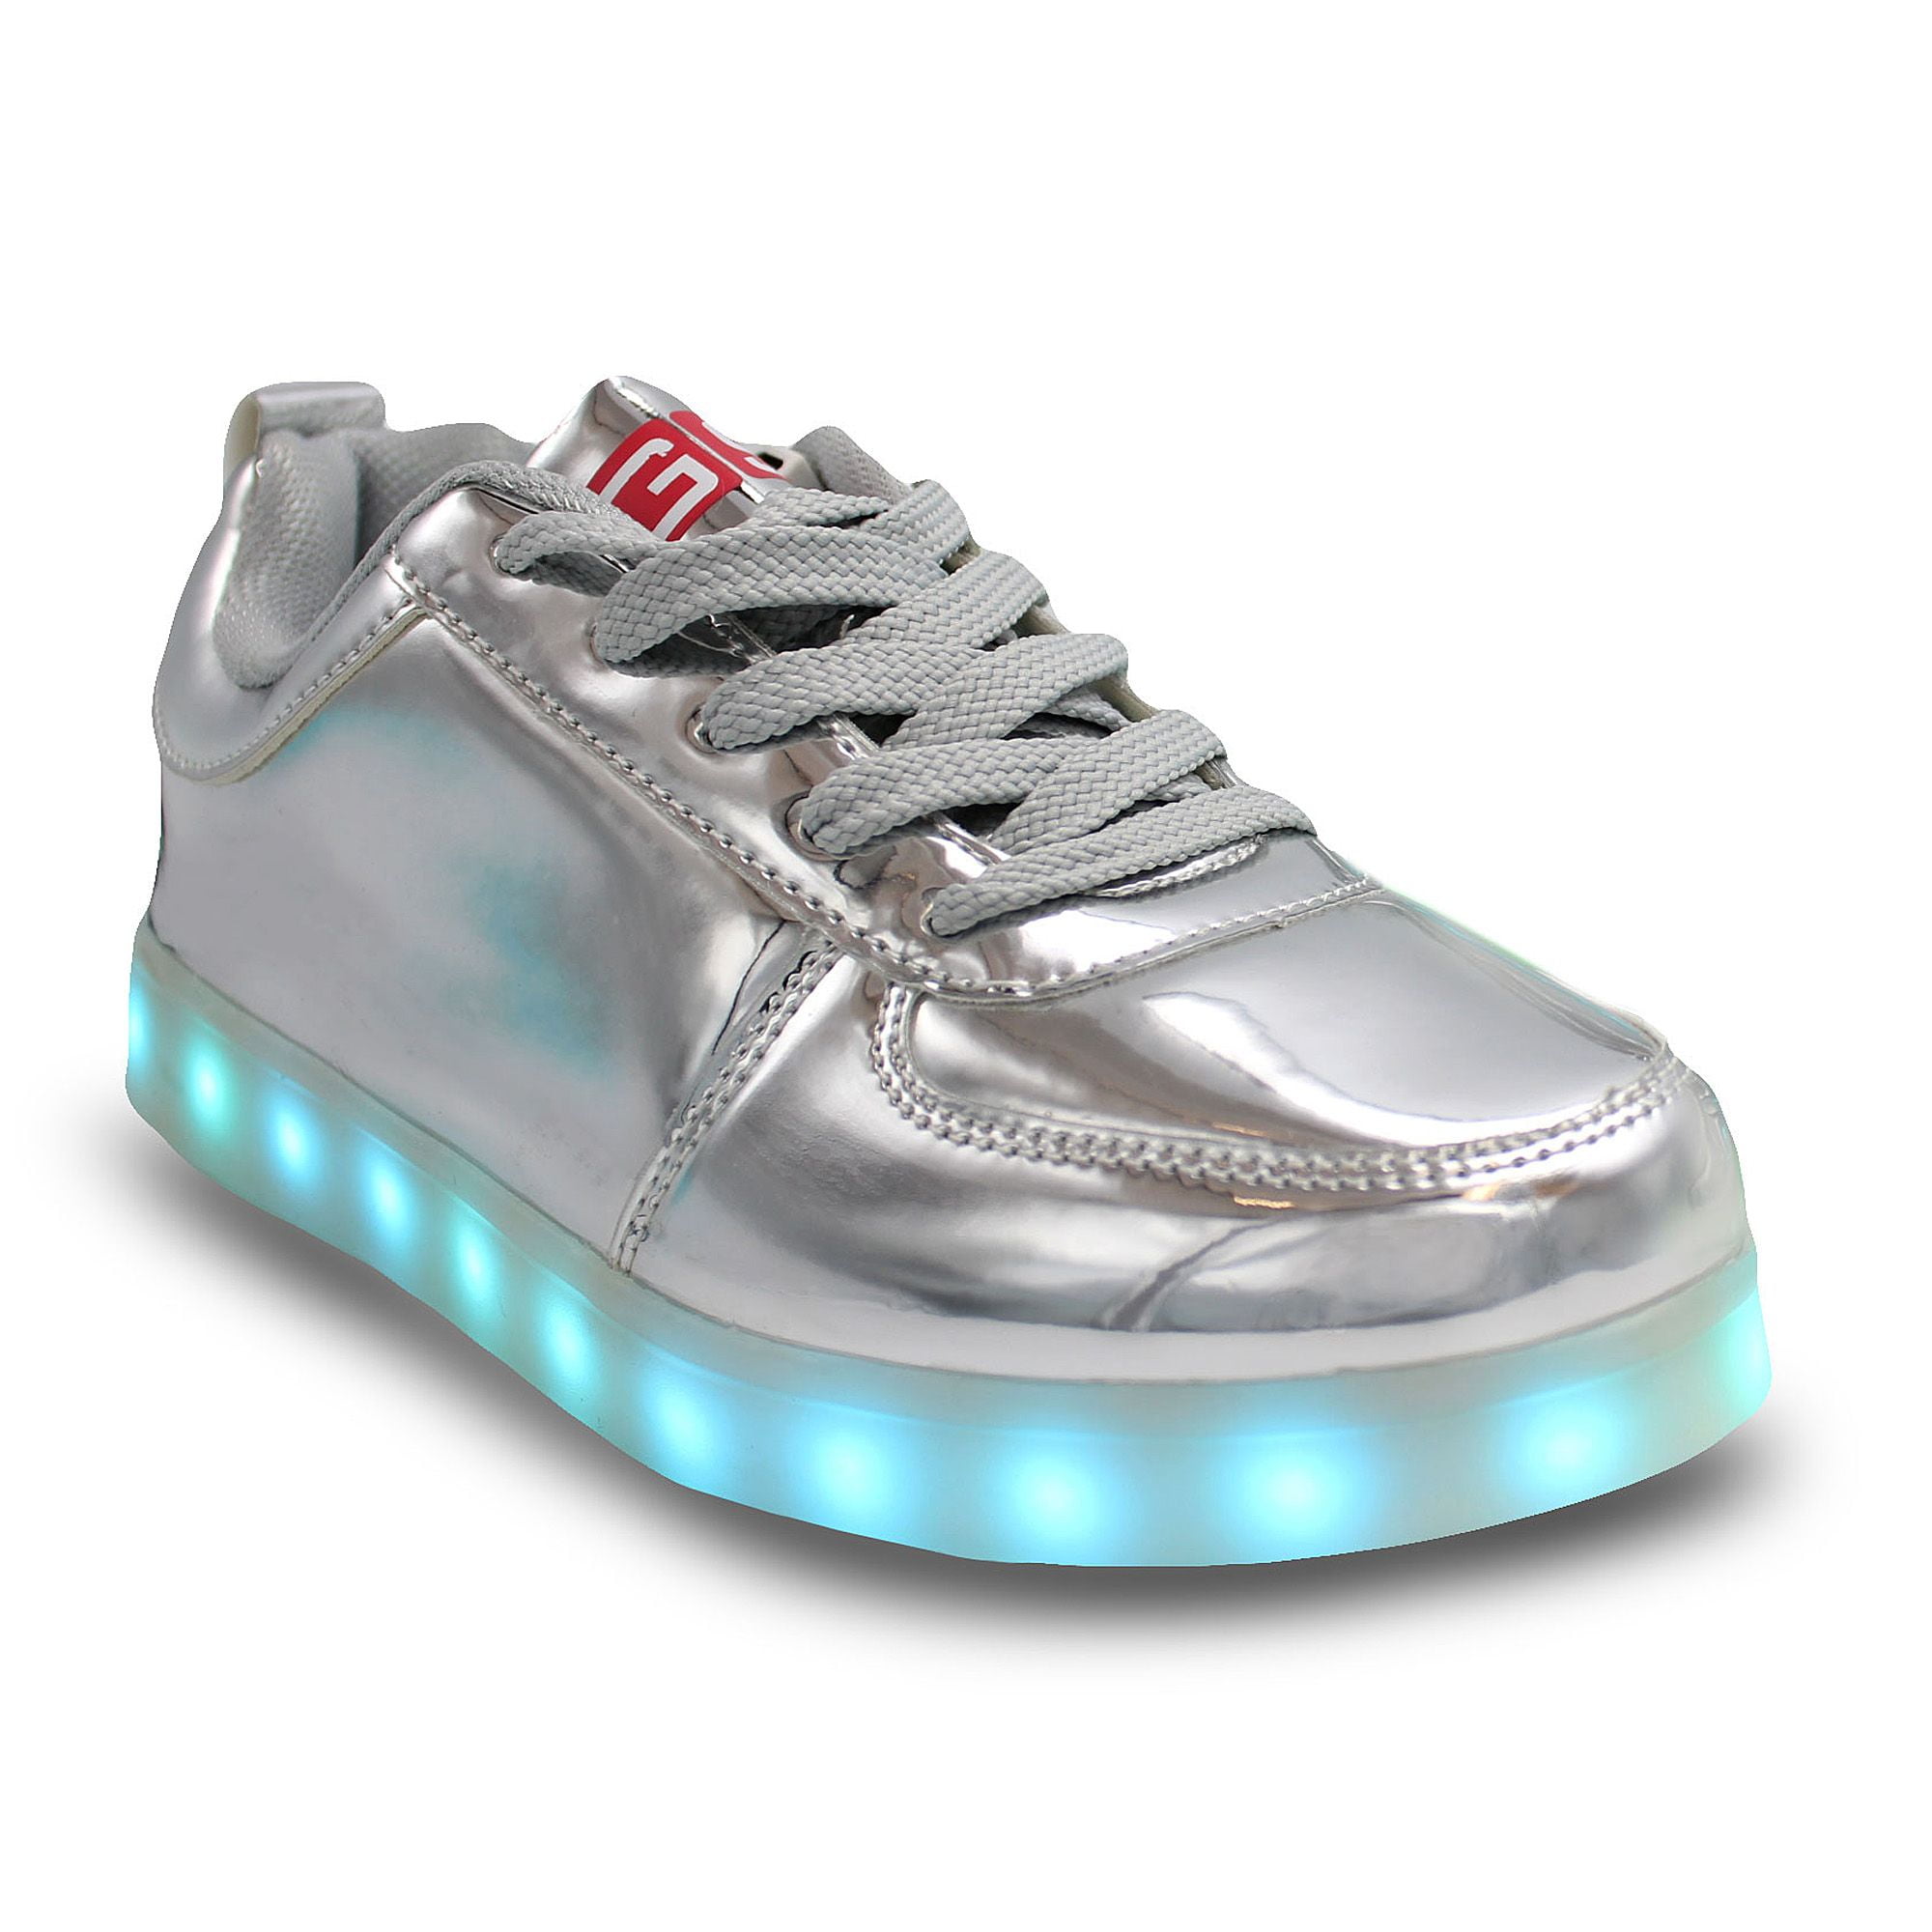 Family Smiles - LED Light Up Sneakers Kids Low Top USB Charging Boys Girls Unisex Lace Up Shoes Silver